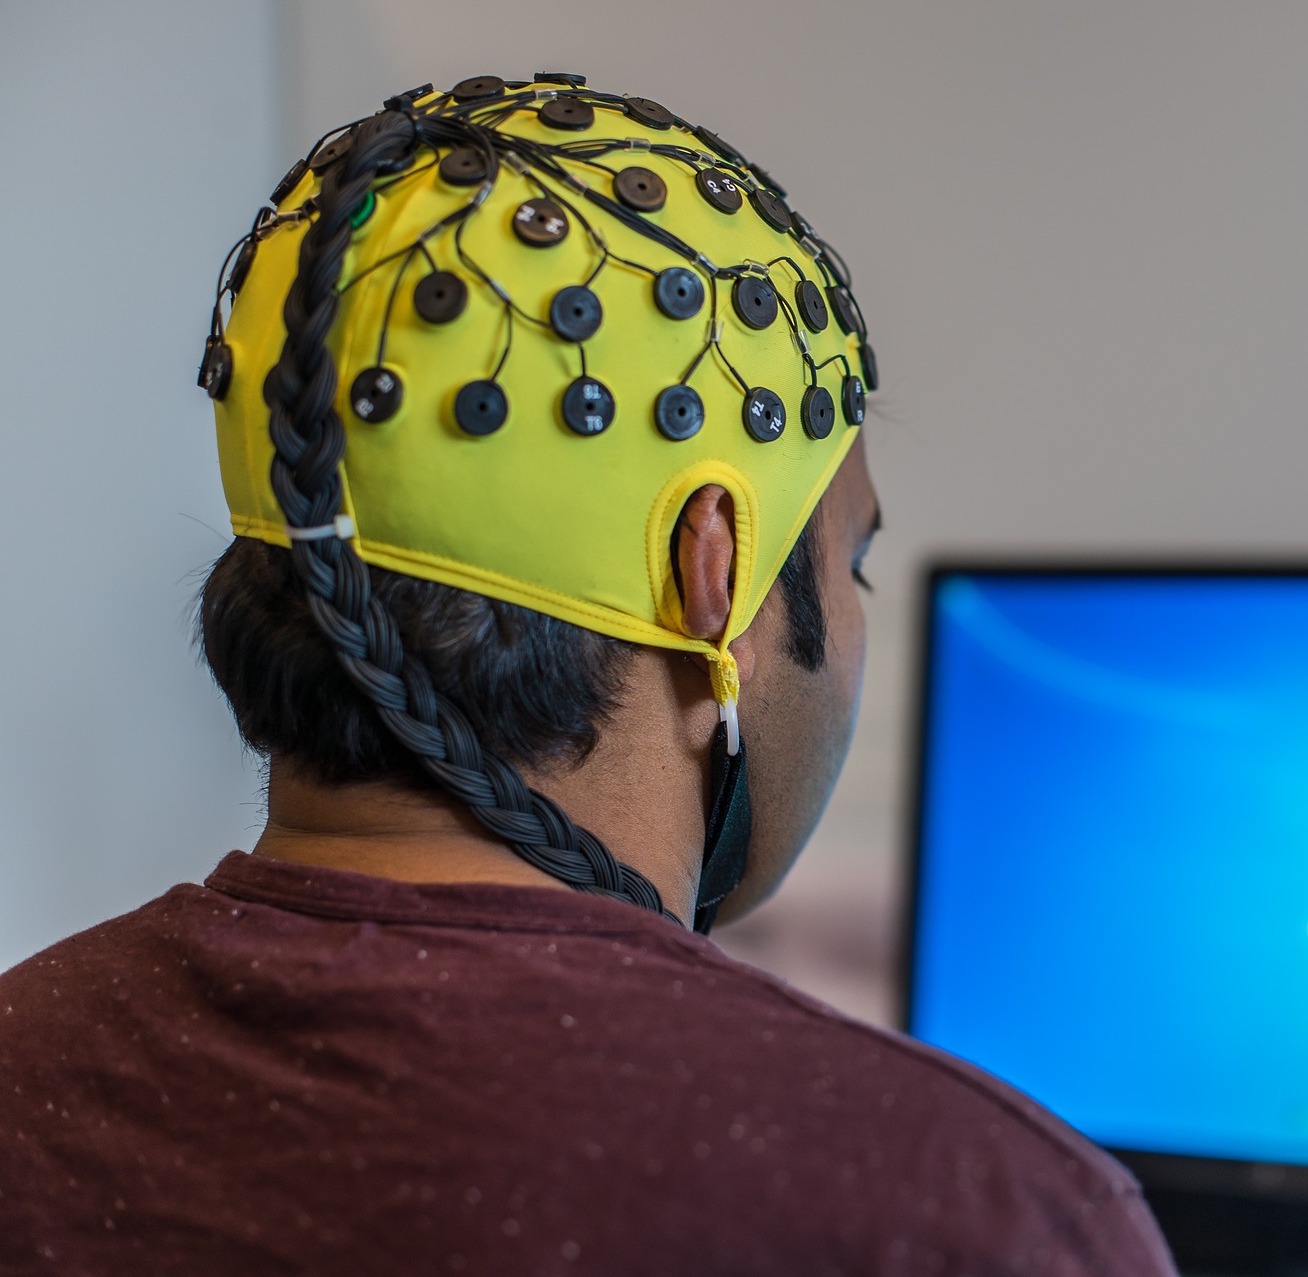 In addition to self-report and behavioral measures, researchers in psychology use physiological measures. An electroencephalograph (EEG) records electrical activity from the brain. *Image by ulrichw from Pixabay.*